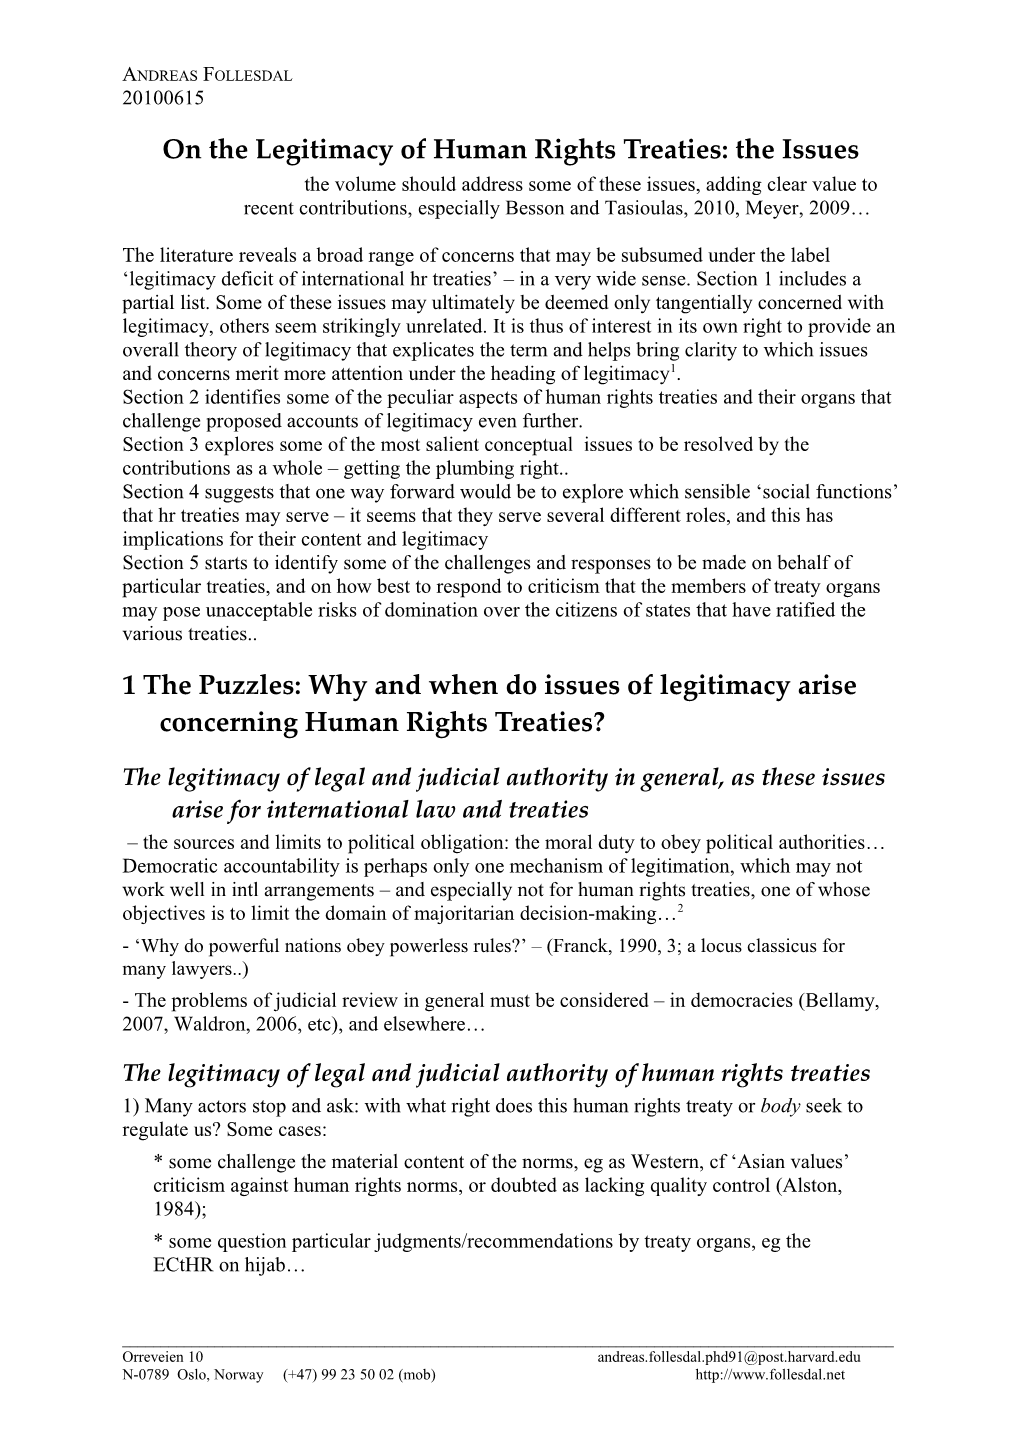 On the Legitimacy of Human Rights Treaties: the Issues